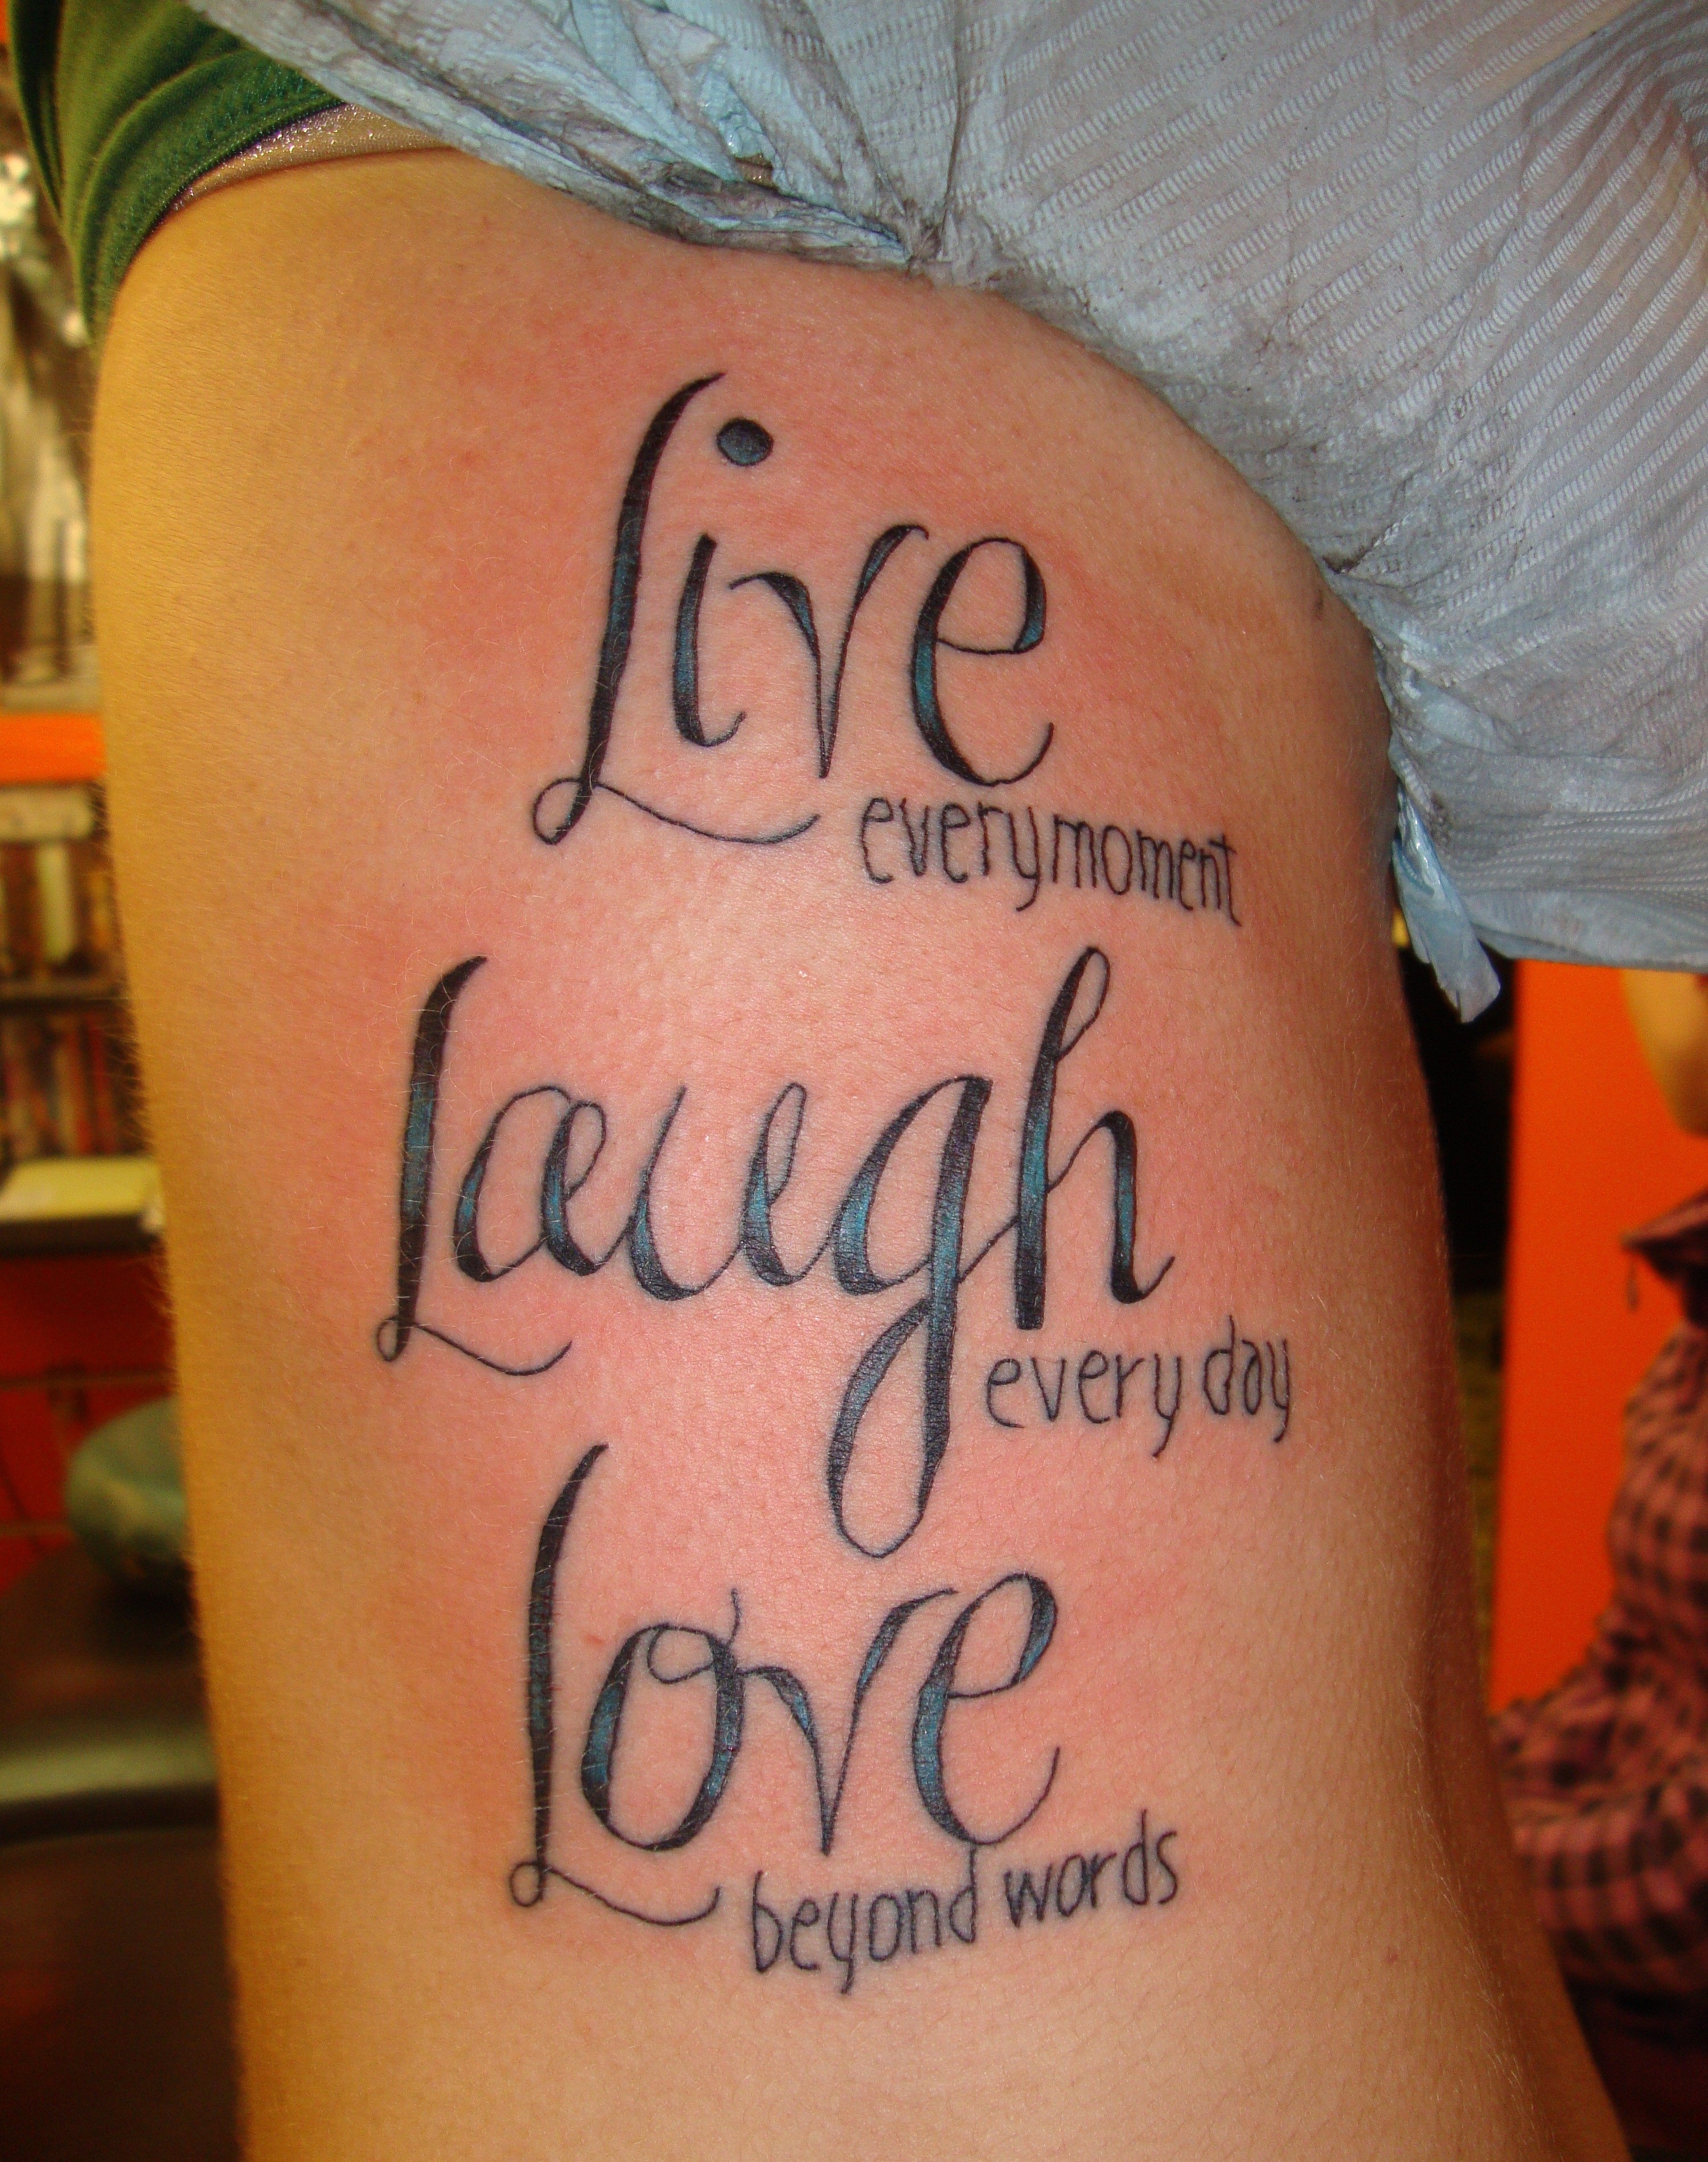 Live Laugh Love Tattoos Designs, Ideas and Meaning